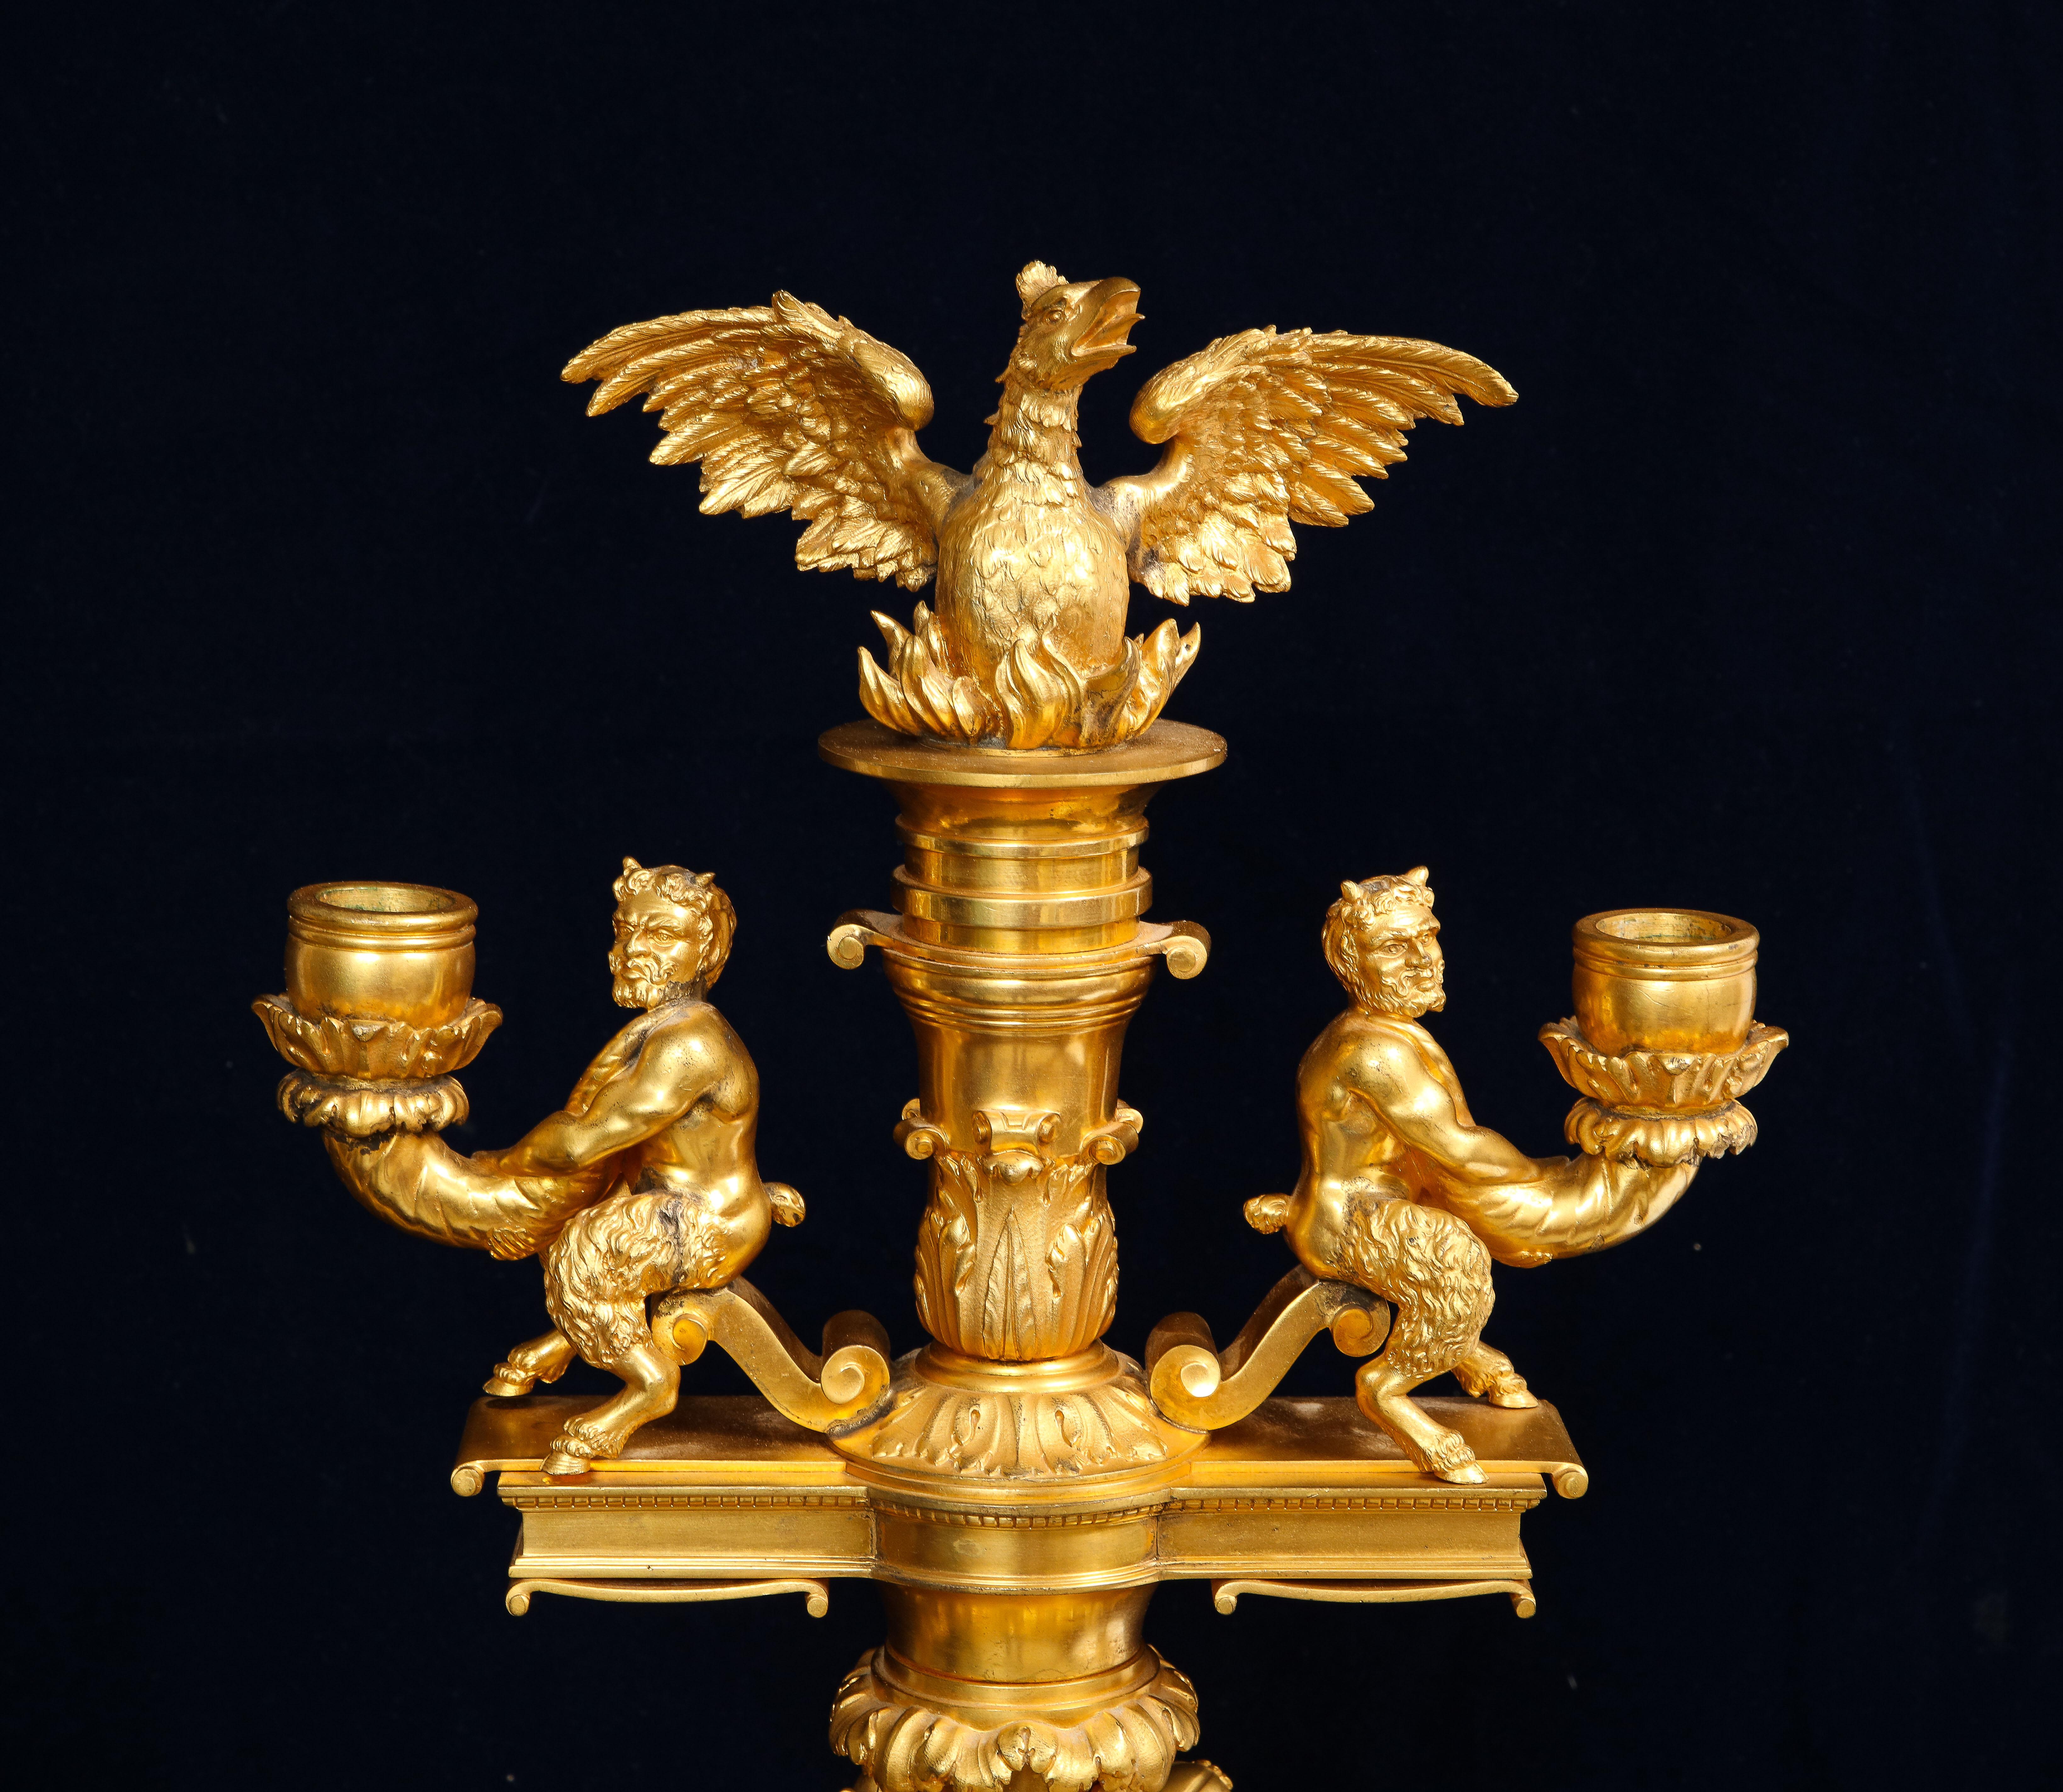 Marvelous Pair of 19th C. French Ormolu Four Arm Candelabras, Signed P. Canaux For Sale 4